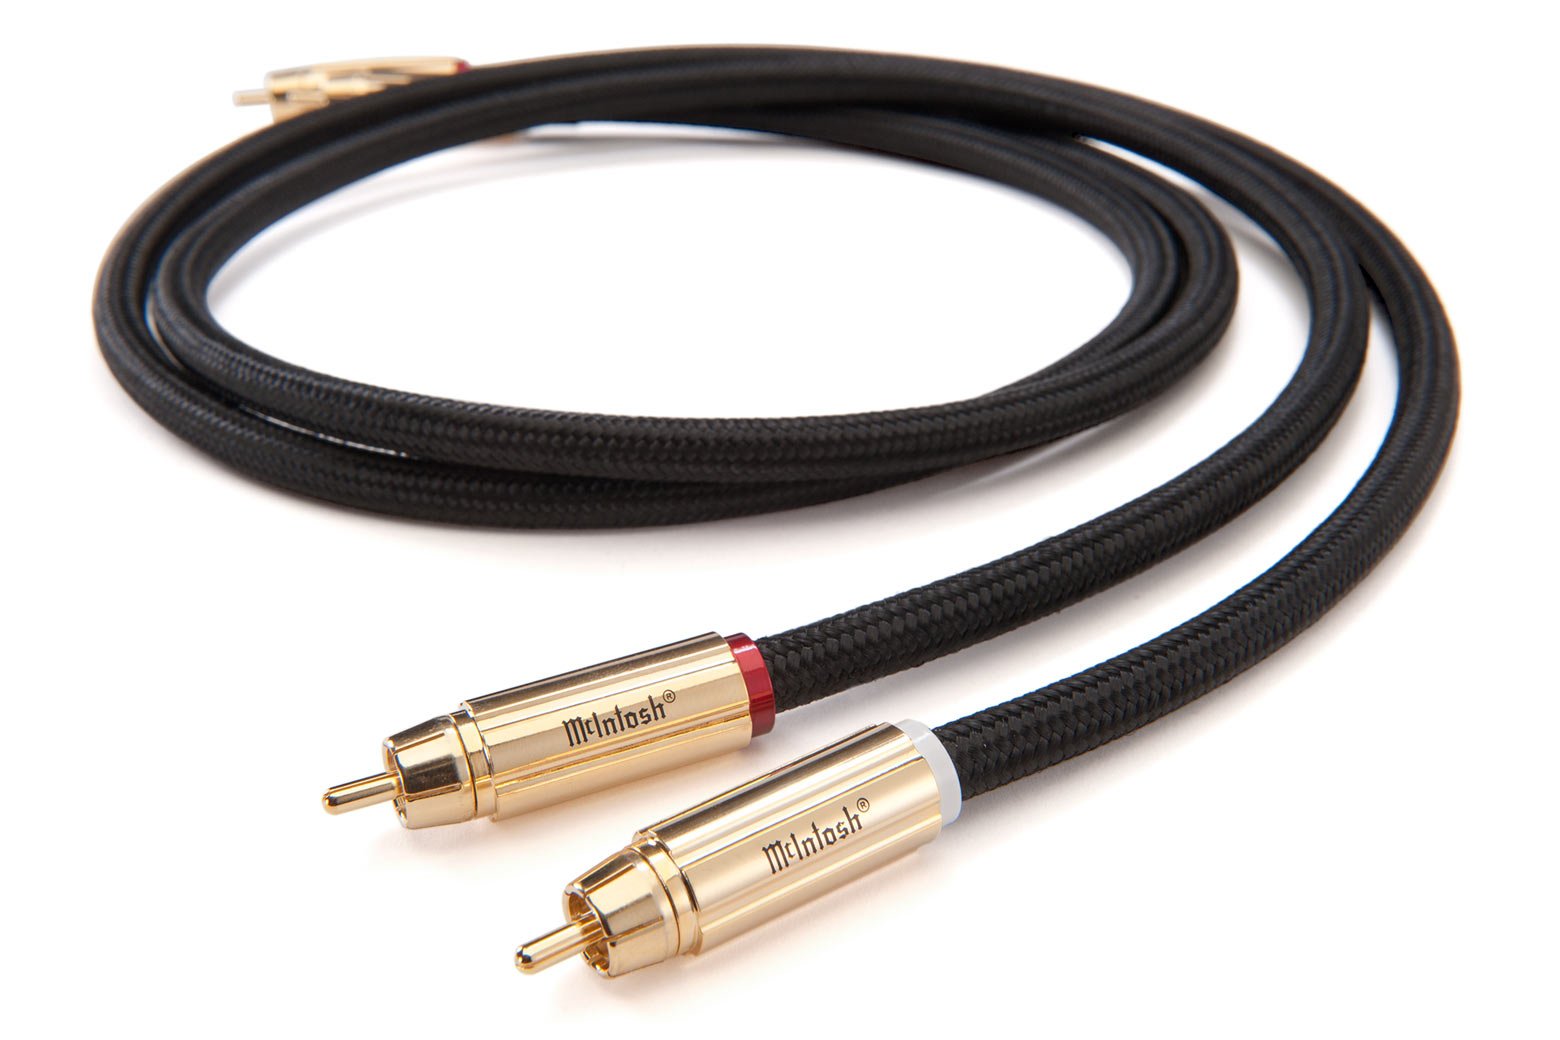 McIntosh Unbalanced Audio Cables - Sold as a Pair (In-Store Purchases Only)